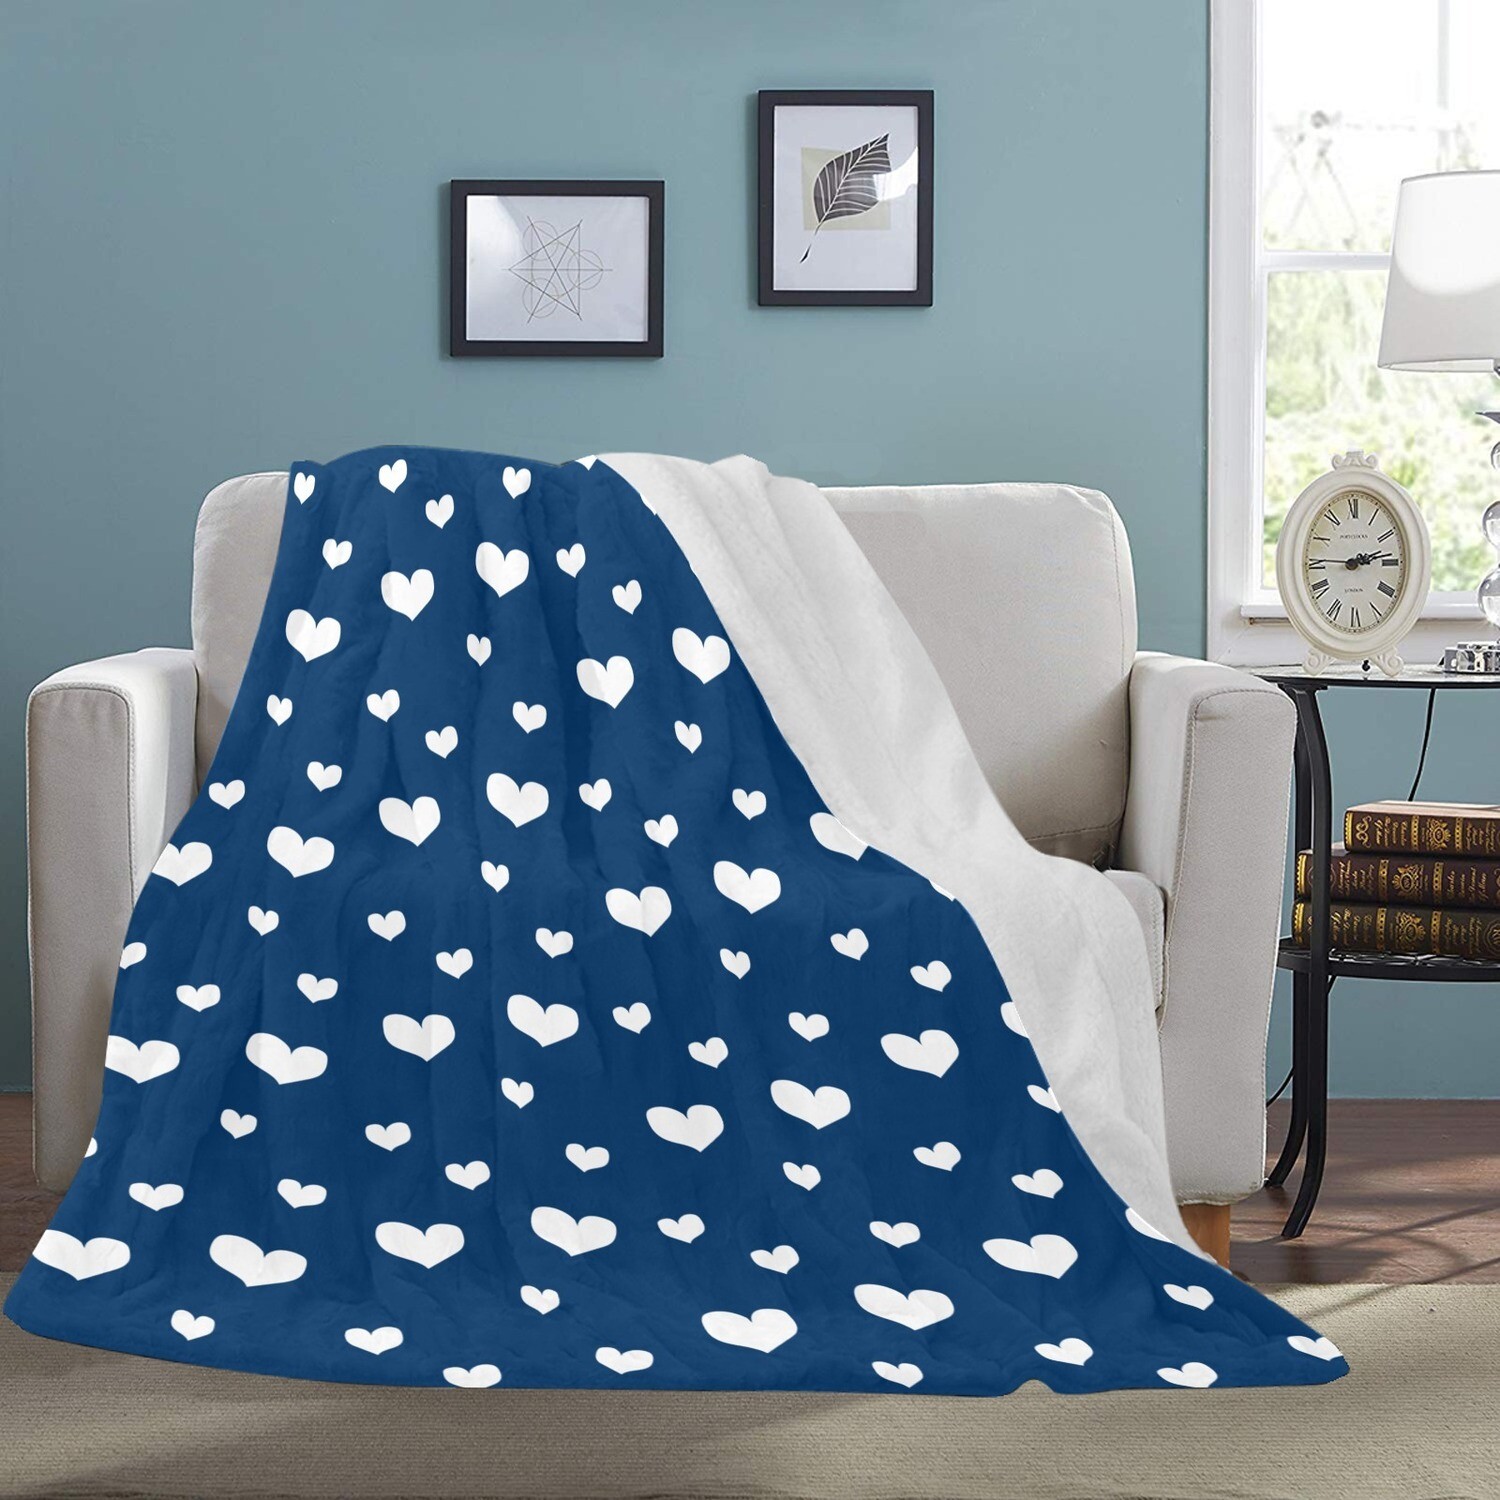 🤴🏽👸🏽💕Large Ultra-Soft Micro Fleece Blanket Valentine white hearts on navy blue, gift, gift for her, gift for him, gift for them, 70"x80"